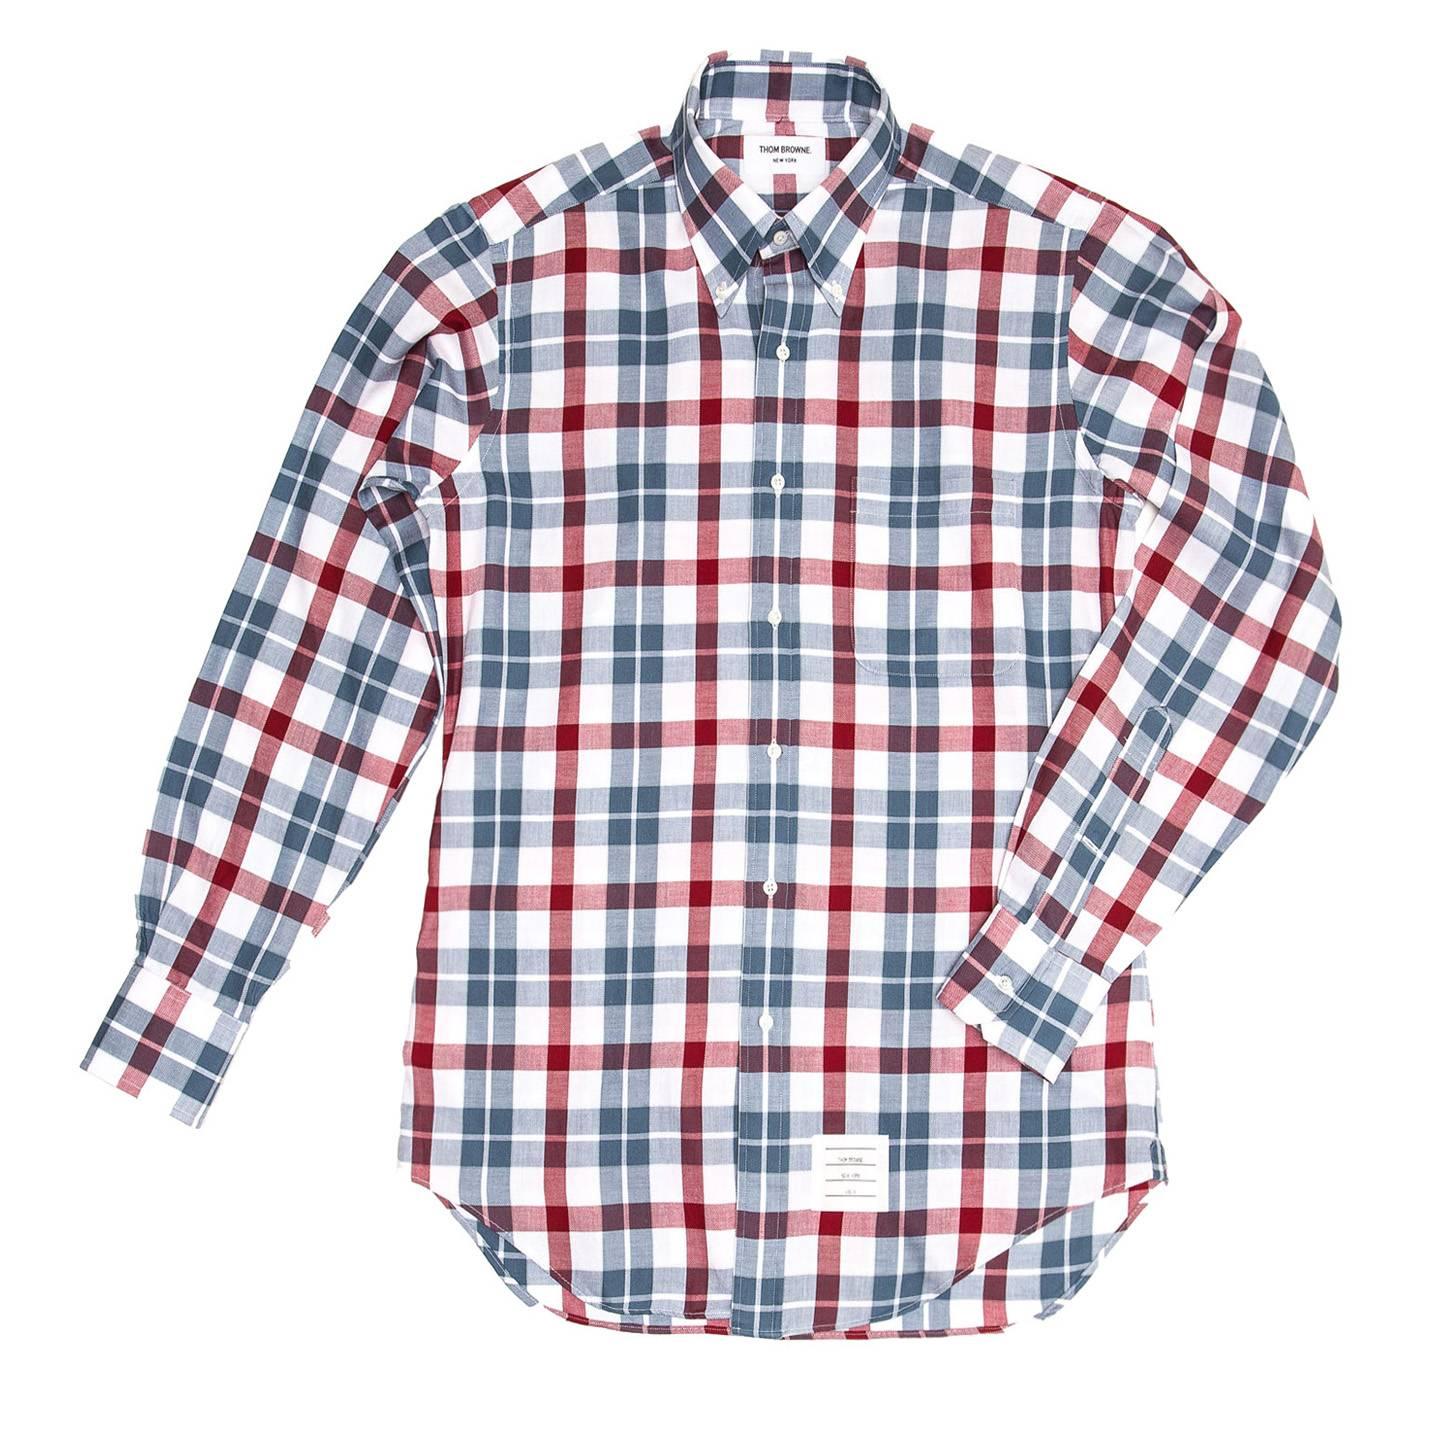 Thom Browne Sky blue, white and red plaid cotton flannel shirt with button down collar, white mother-of-pearl buttons and a patch pocket at bust. Made for Man. Made in U.S.A

Size  4

Condition  Excellent: never worn